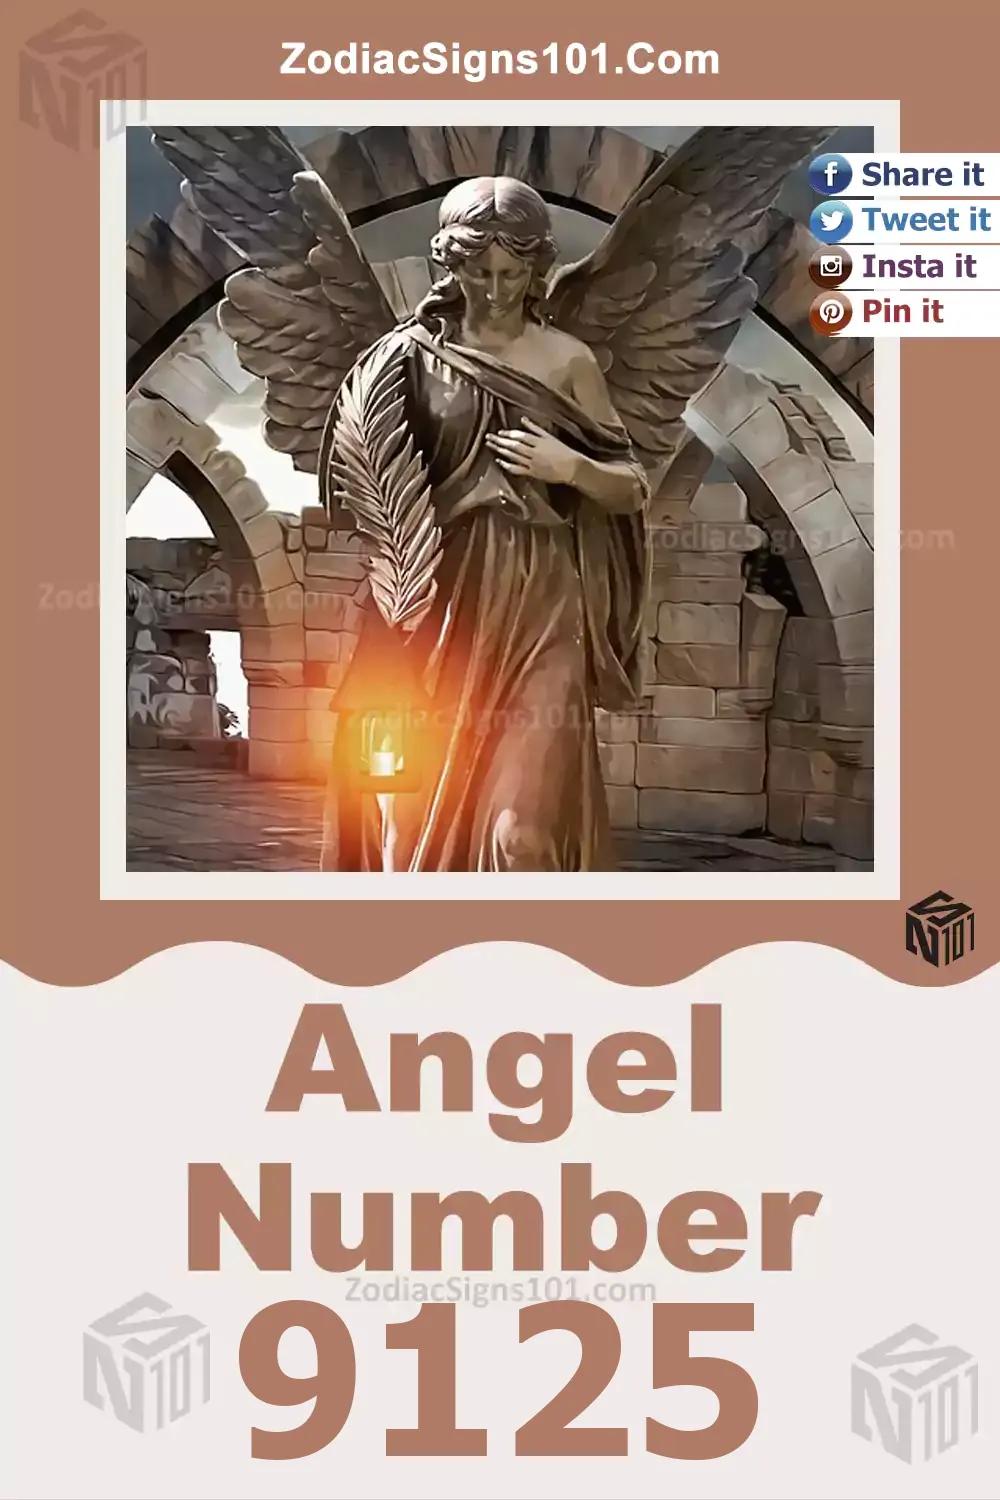 9125 Angel Number Meaning